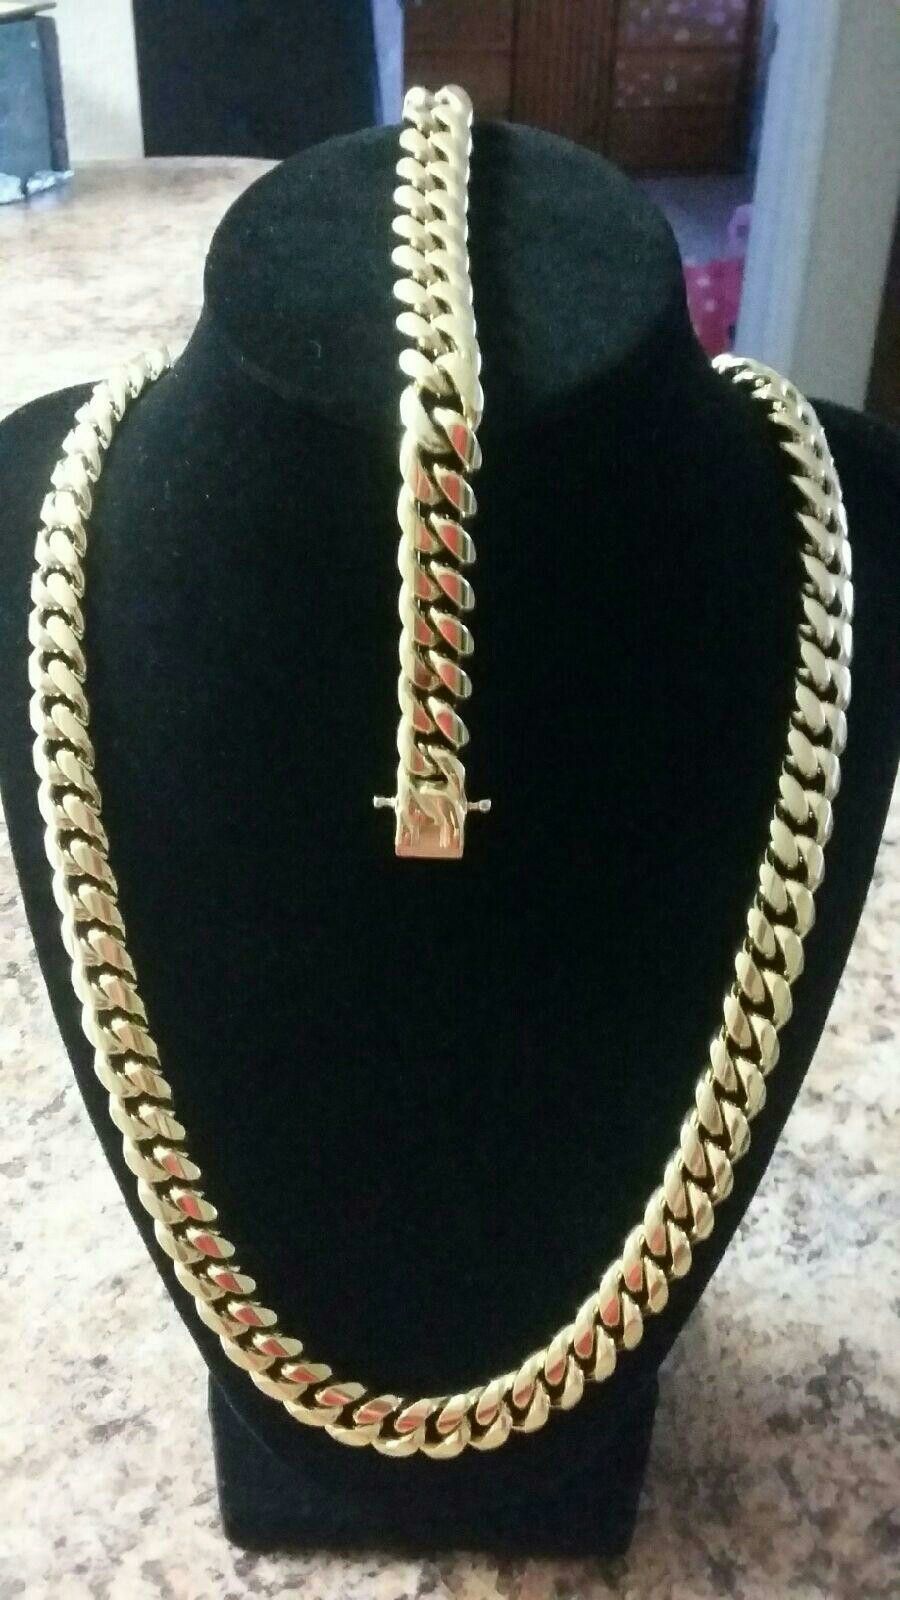 Very nice 14kt gold over staineless steel 12mm by 3oinch long Miami cuban link Chain with matching bracelet for sale !!